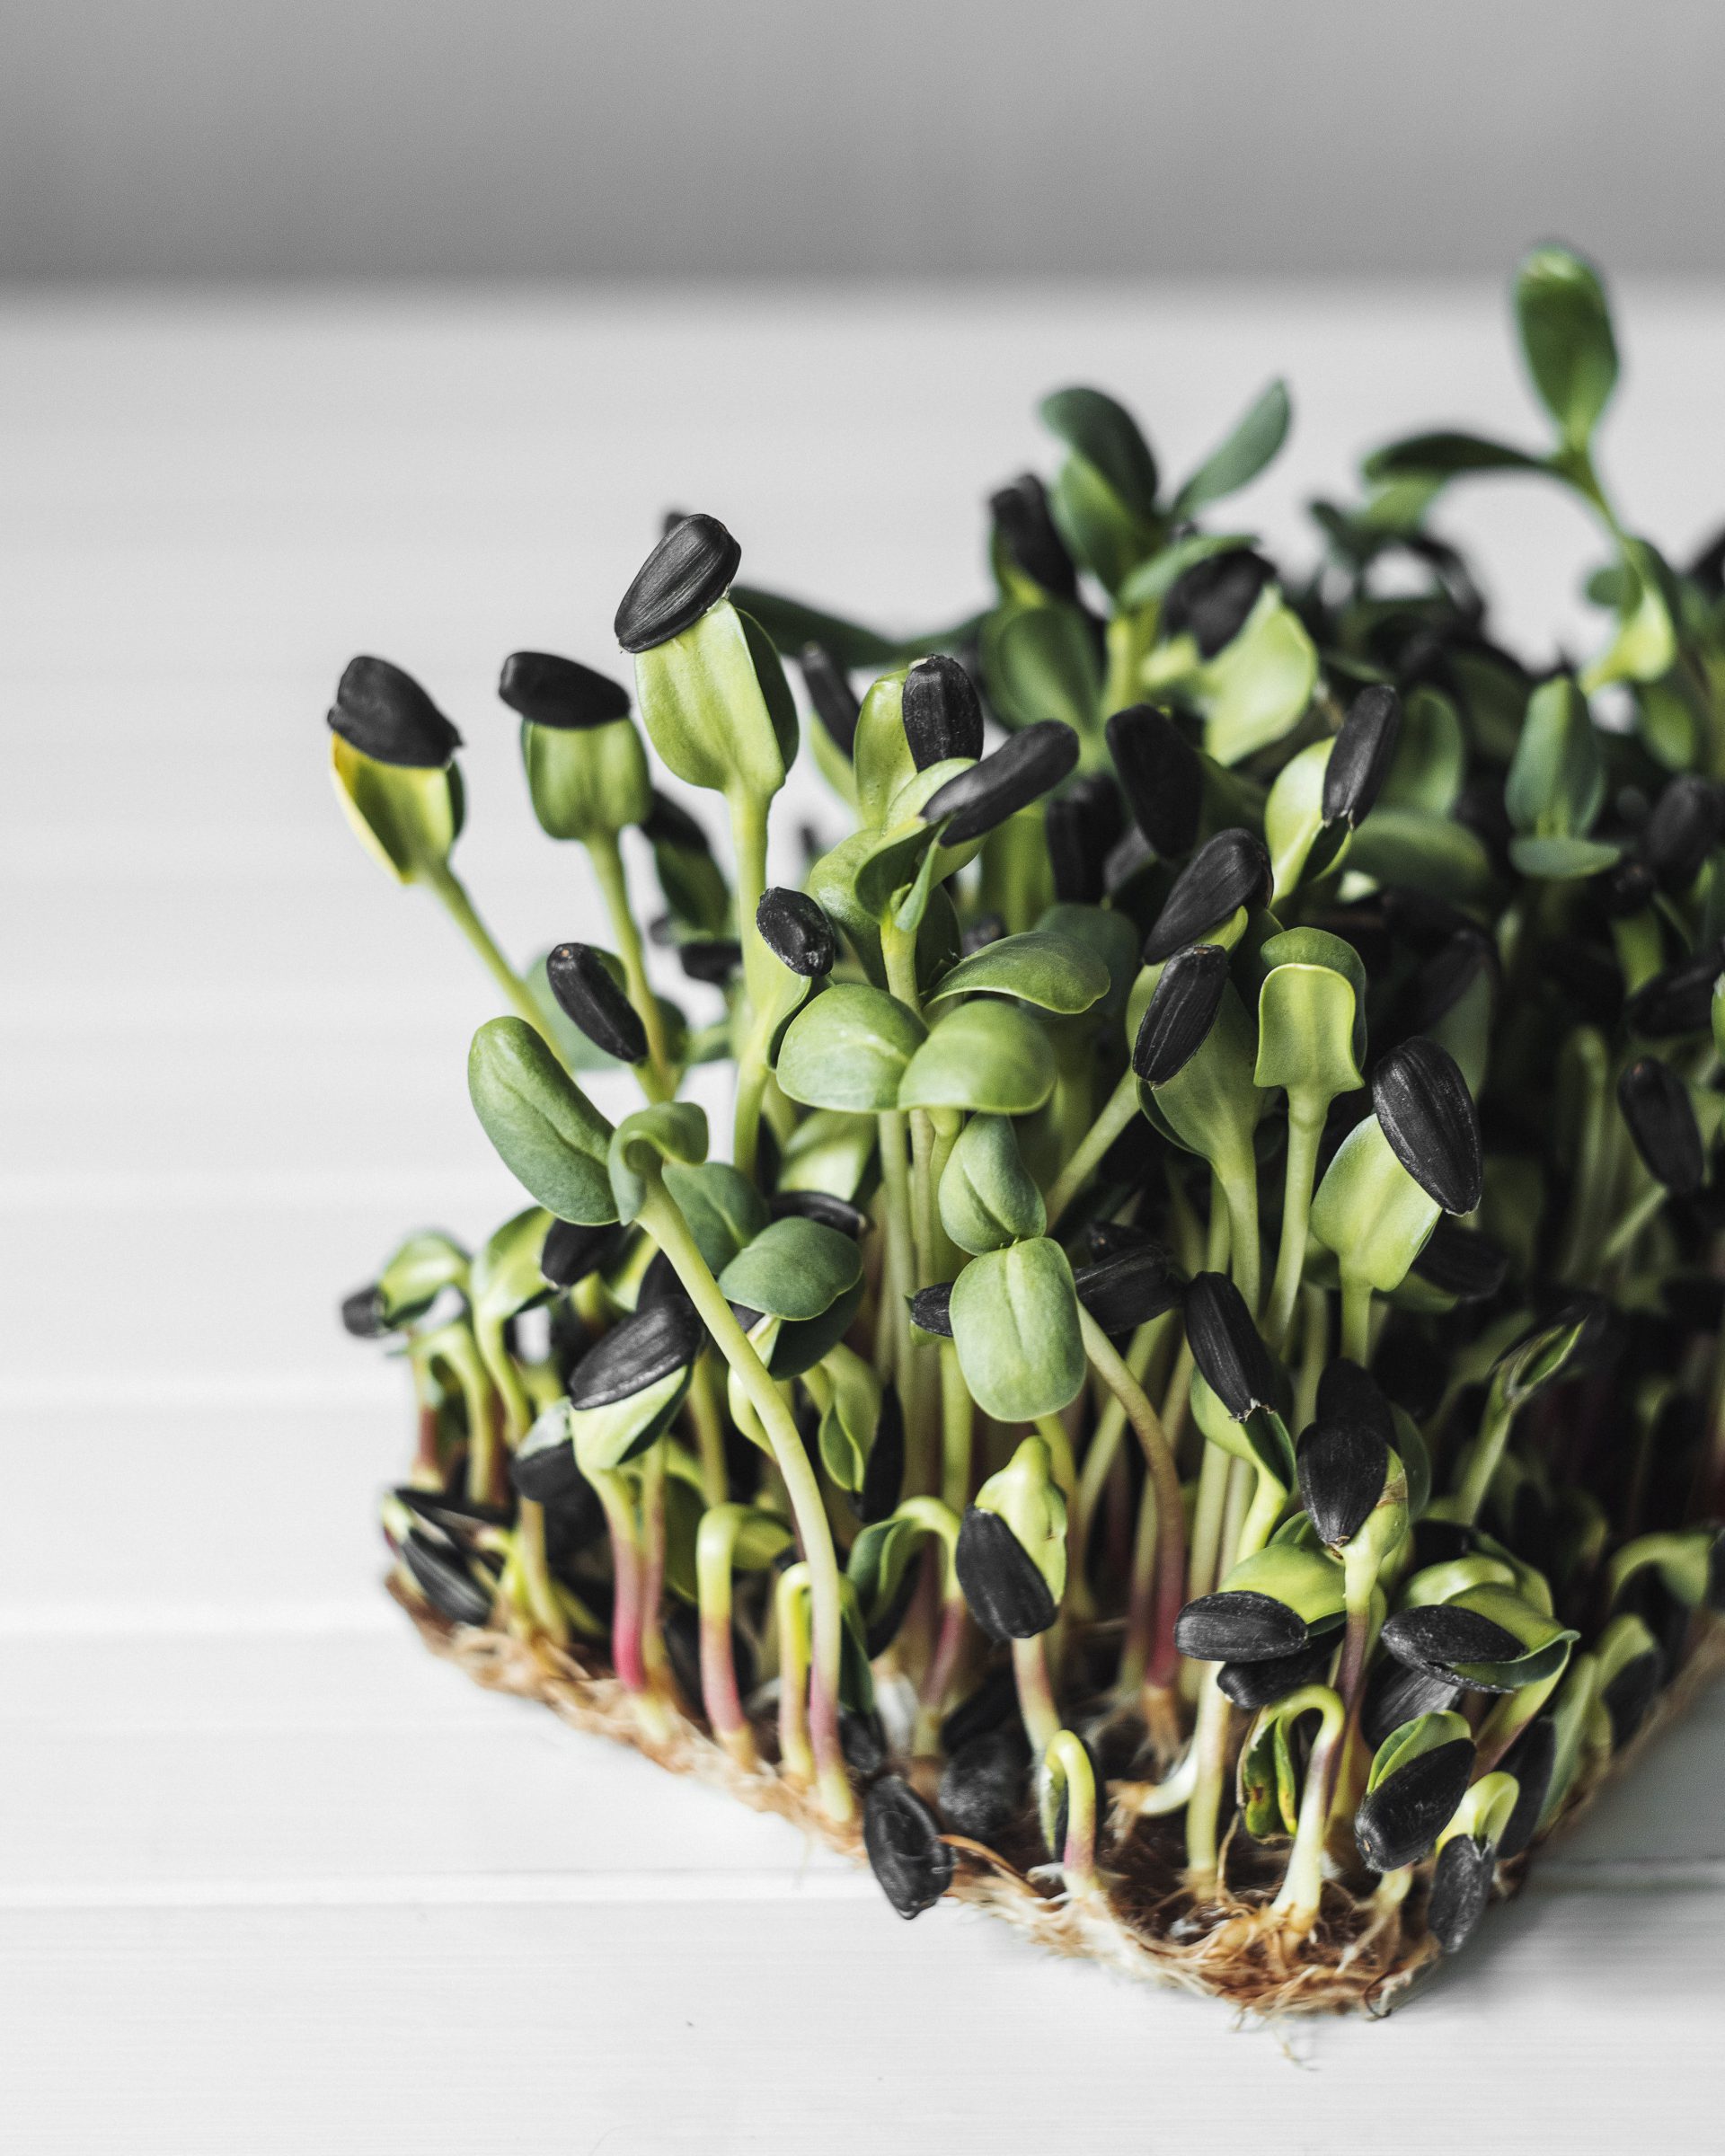 The world of microgreens: nutrition and flavour